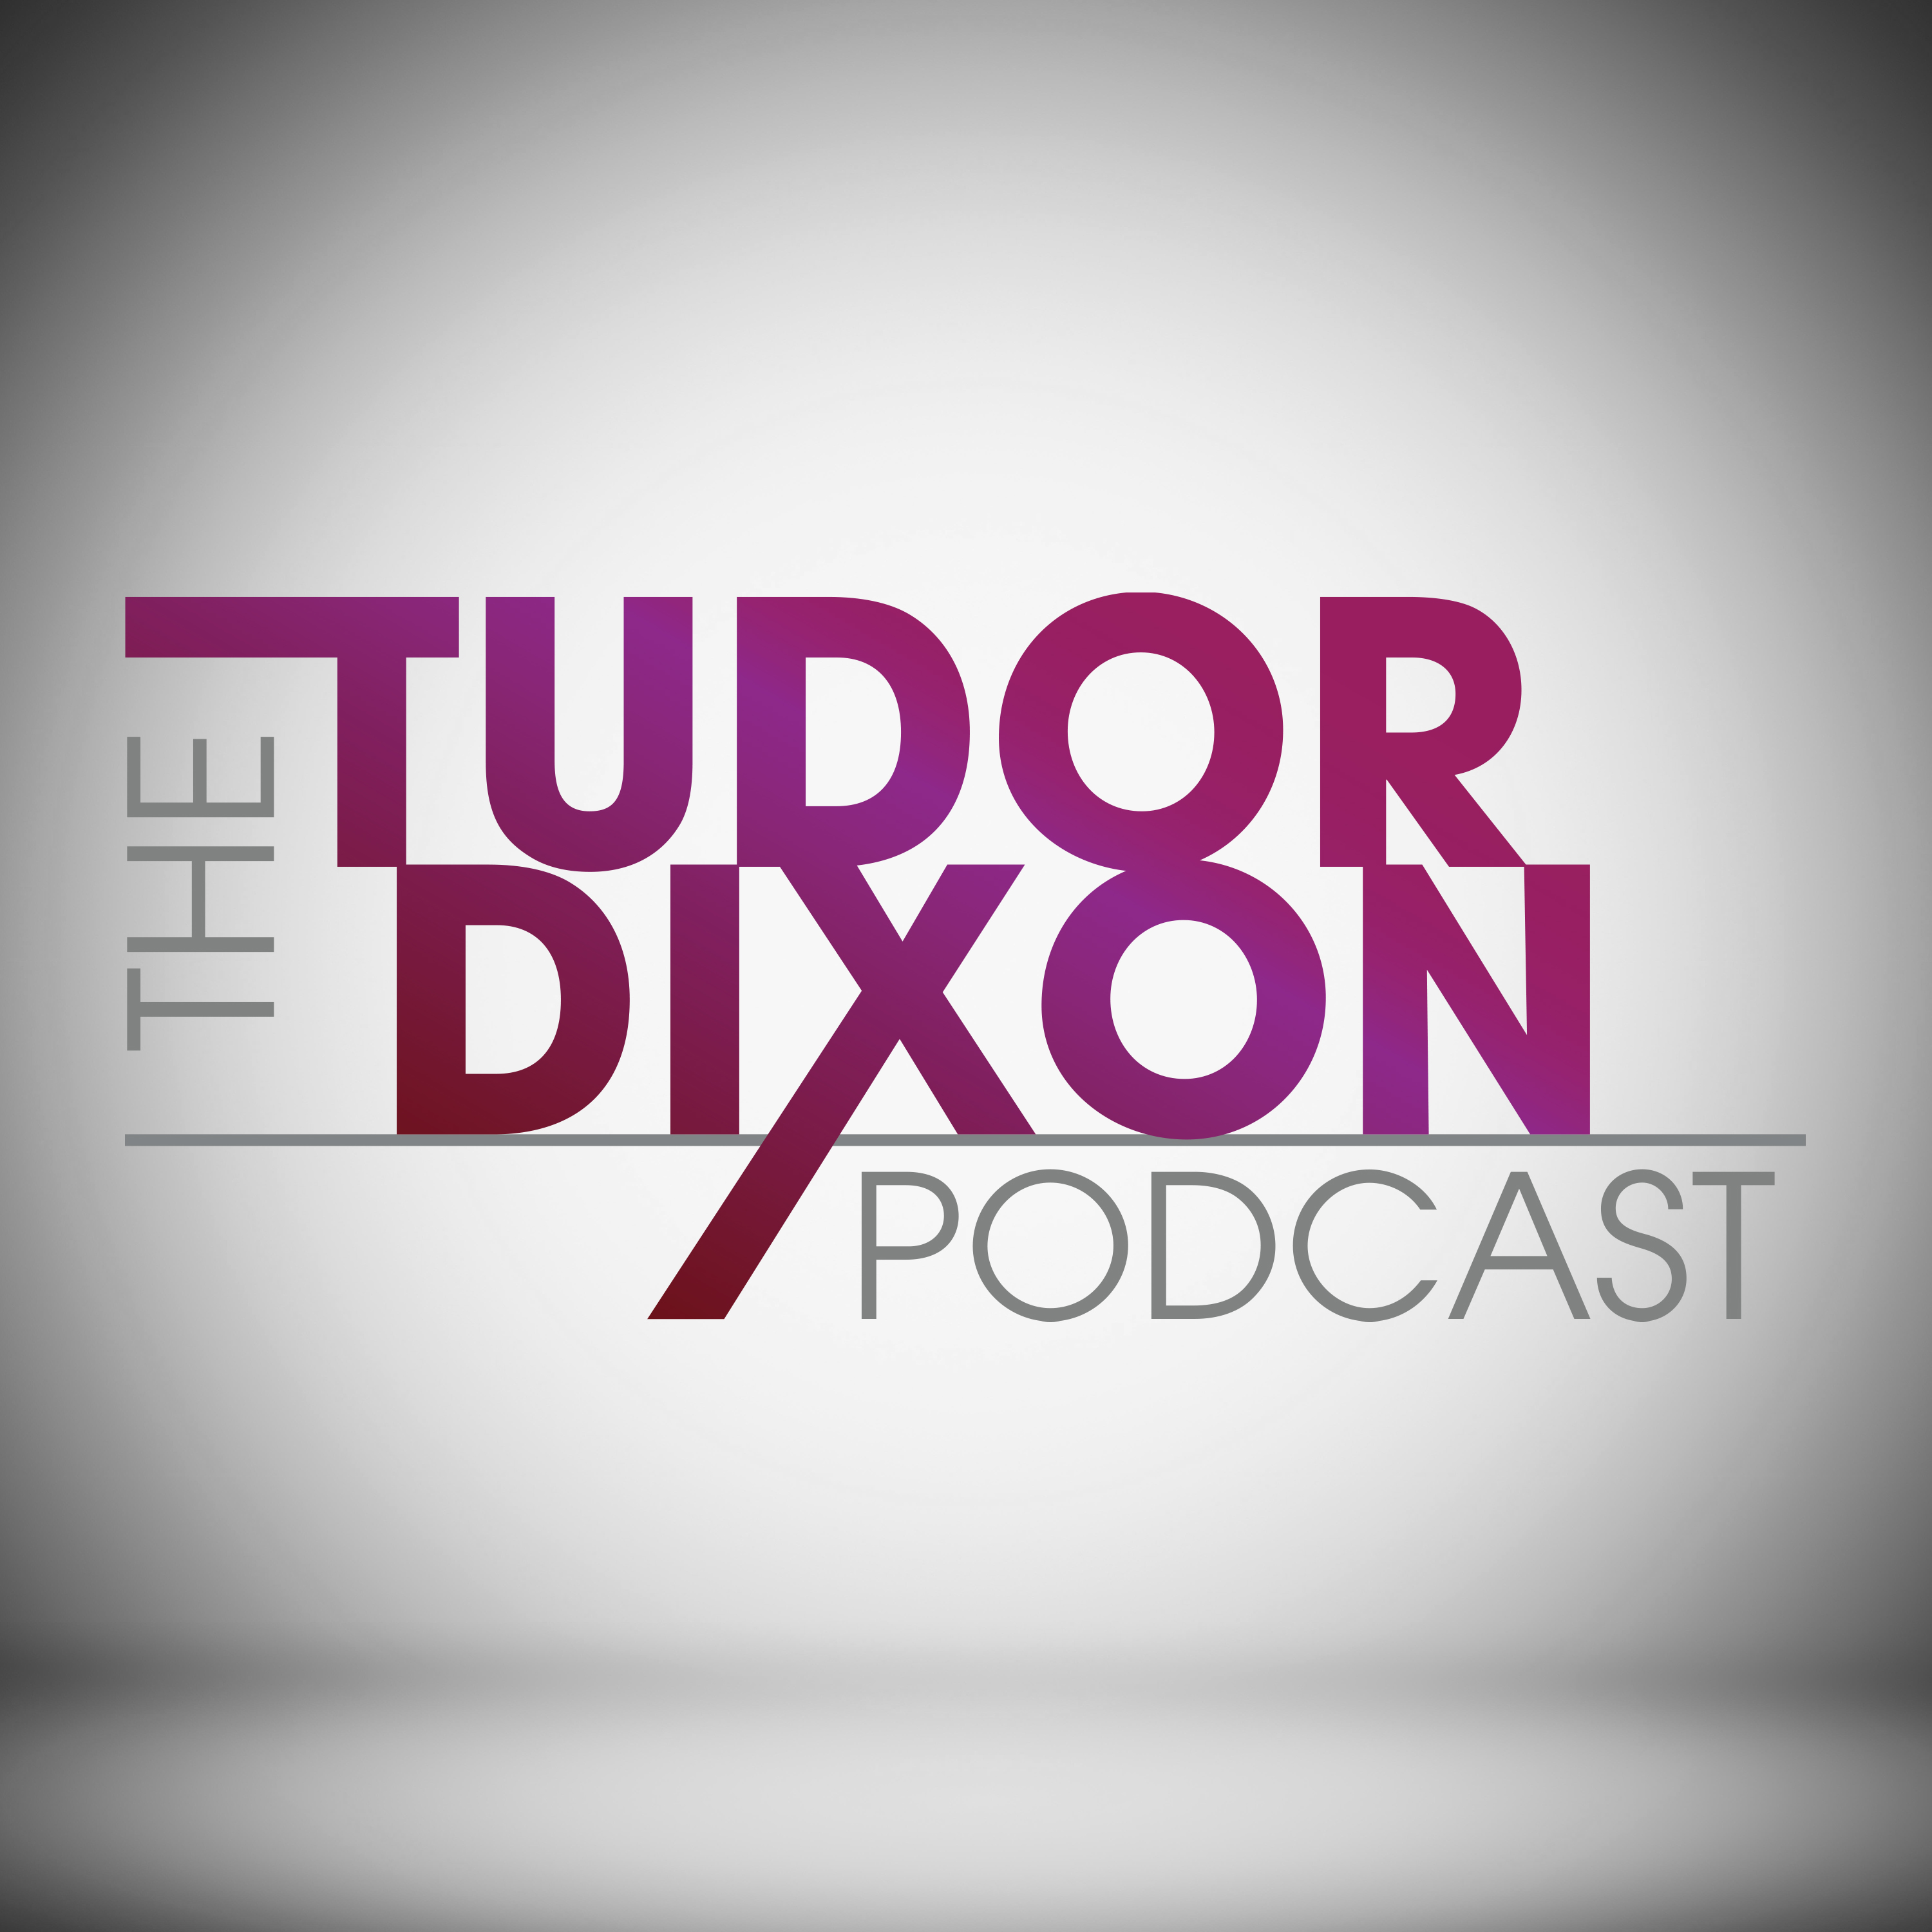 The Tudor Dixon Podcast: How Impeachment Became a Never-Ending Payback Game